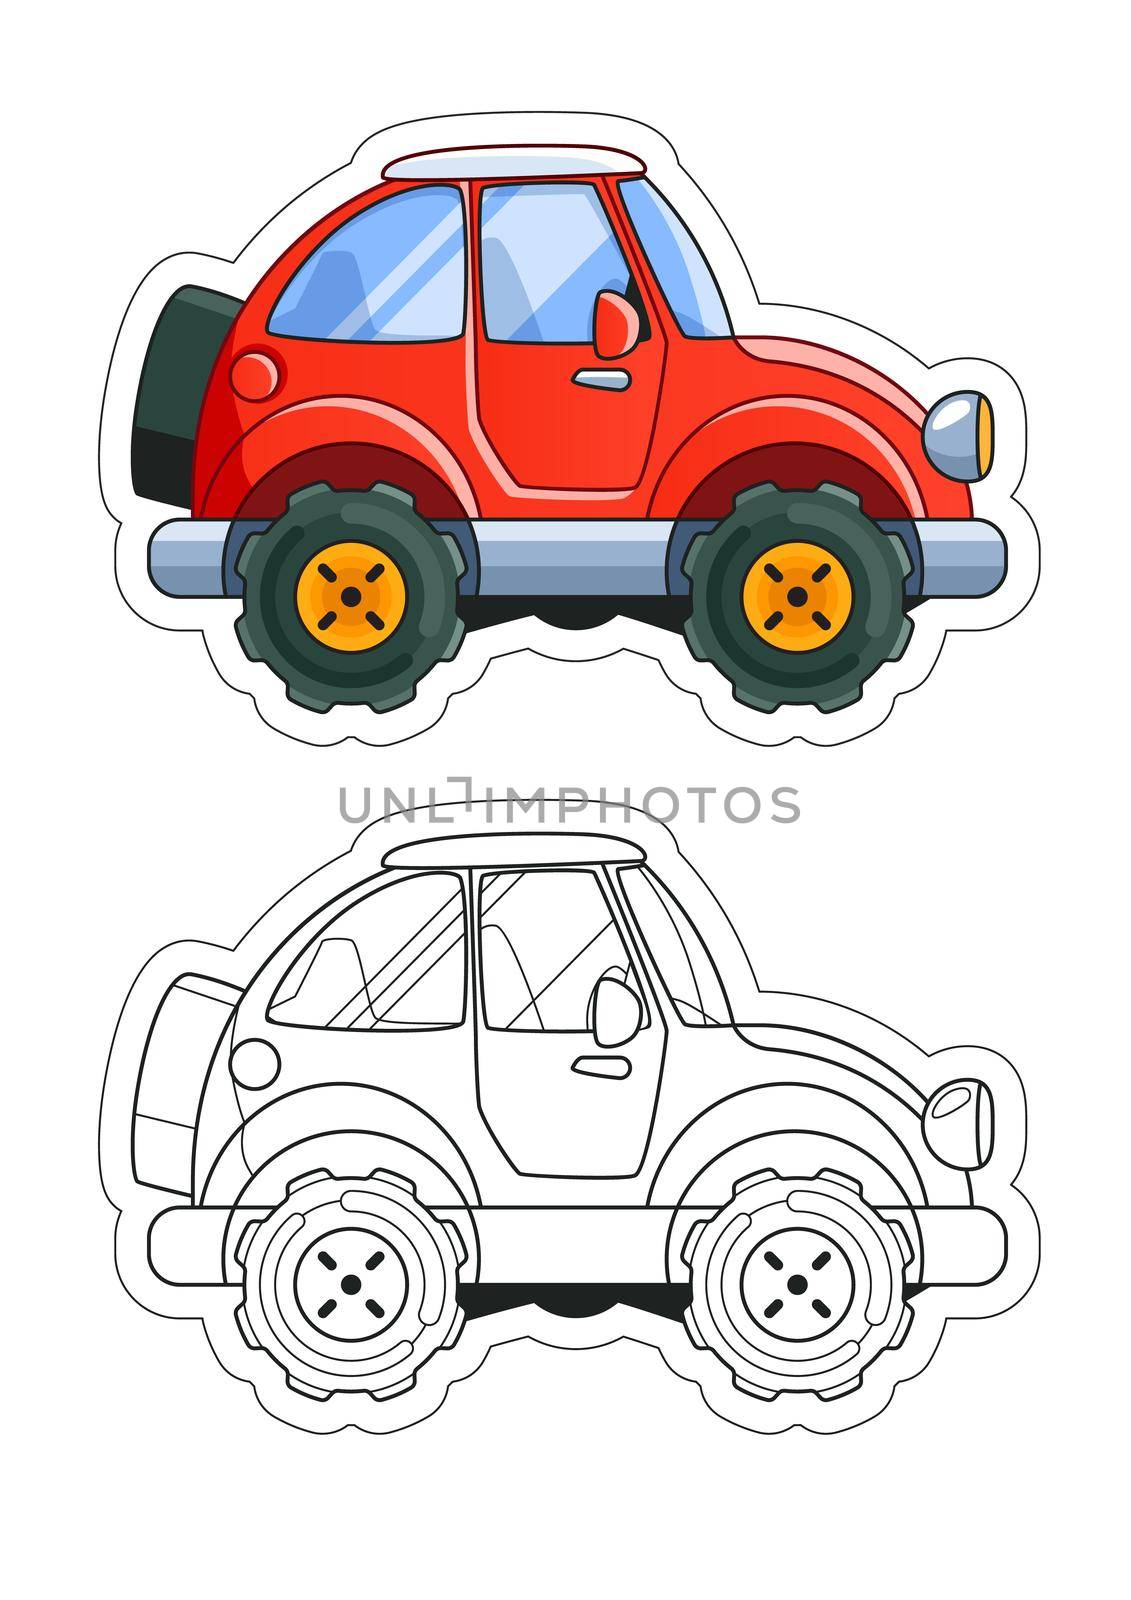 Red Cartoon Car Side View Coloring Book. Colored Version and Line Art.